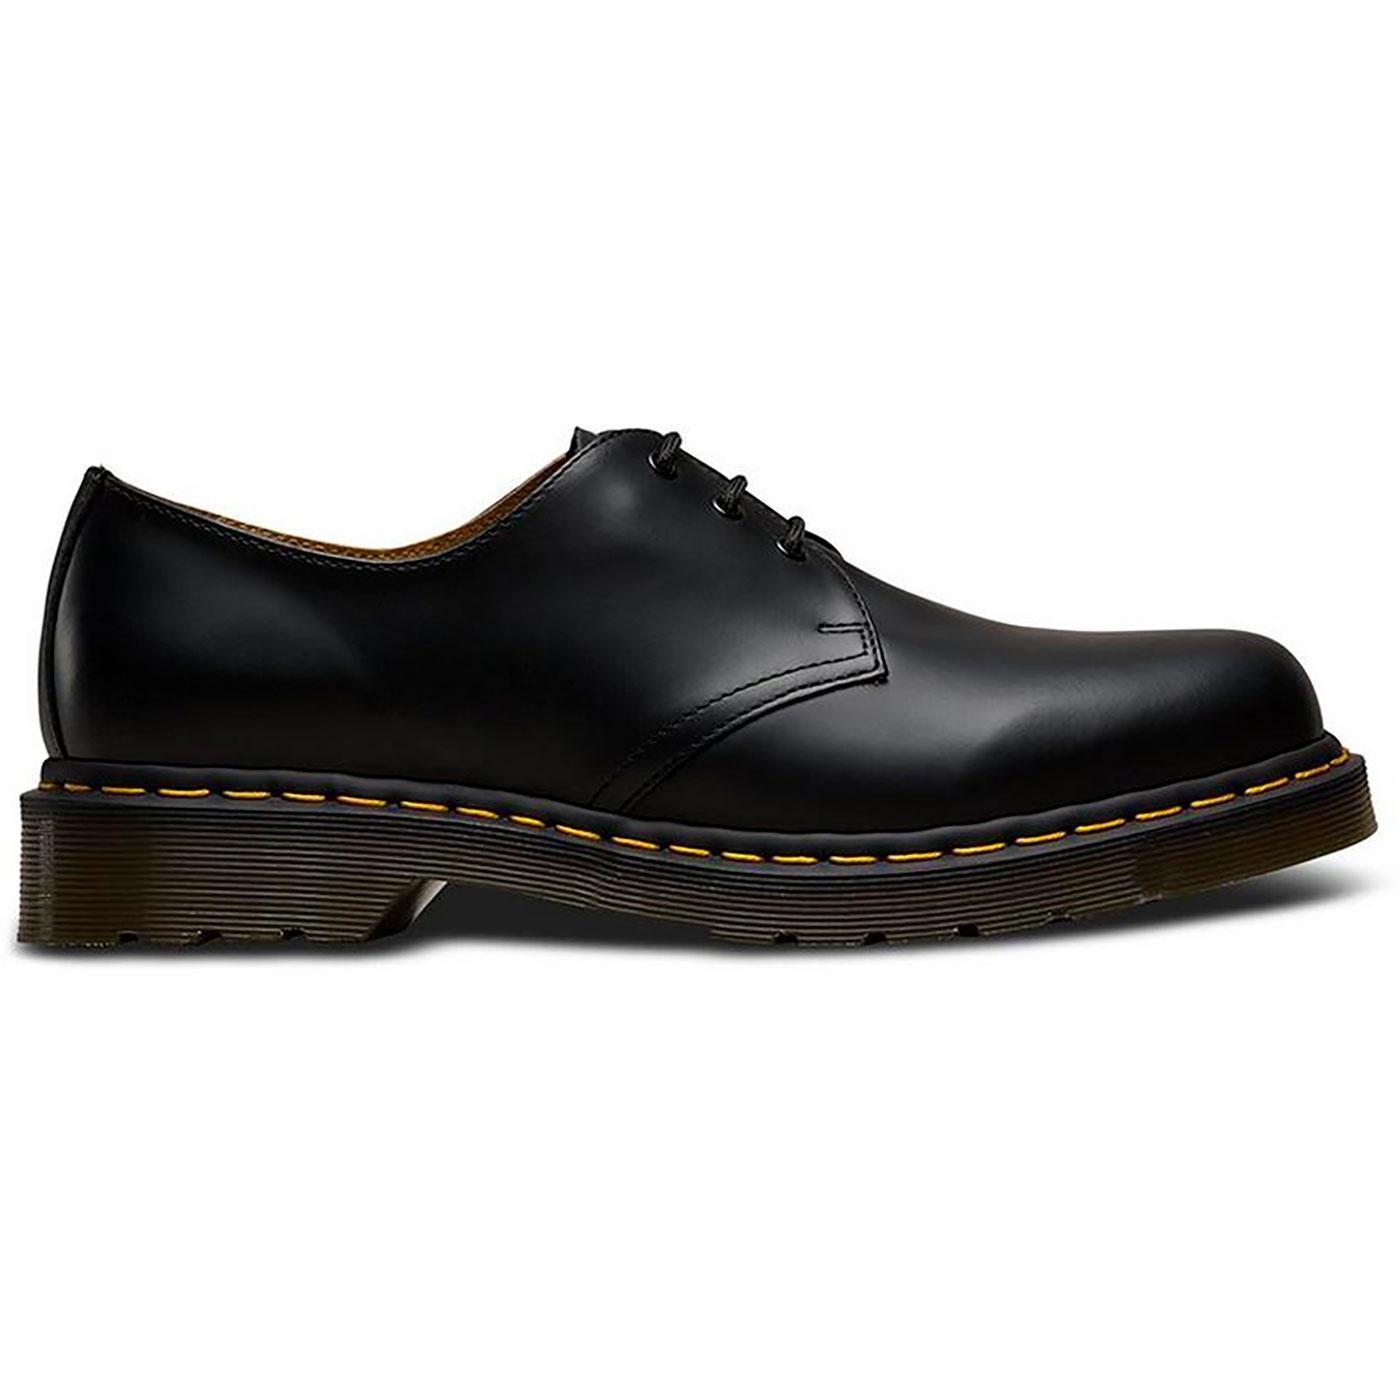 DR MARTENS '1461' Womens Leather Oxford Shoes in Black